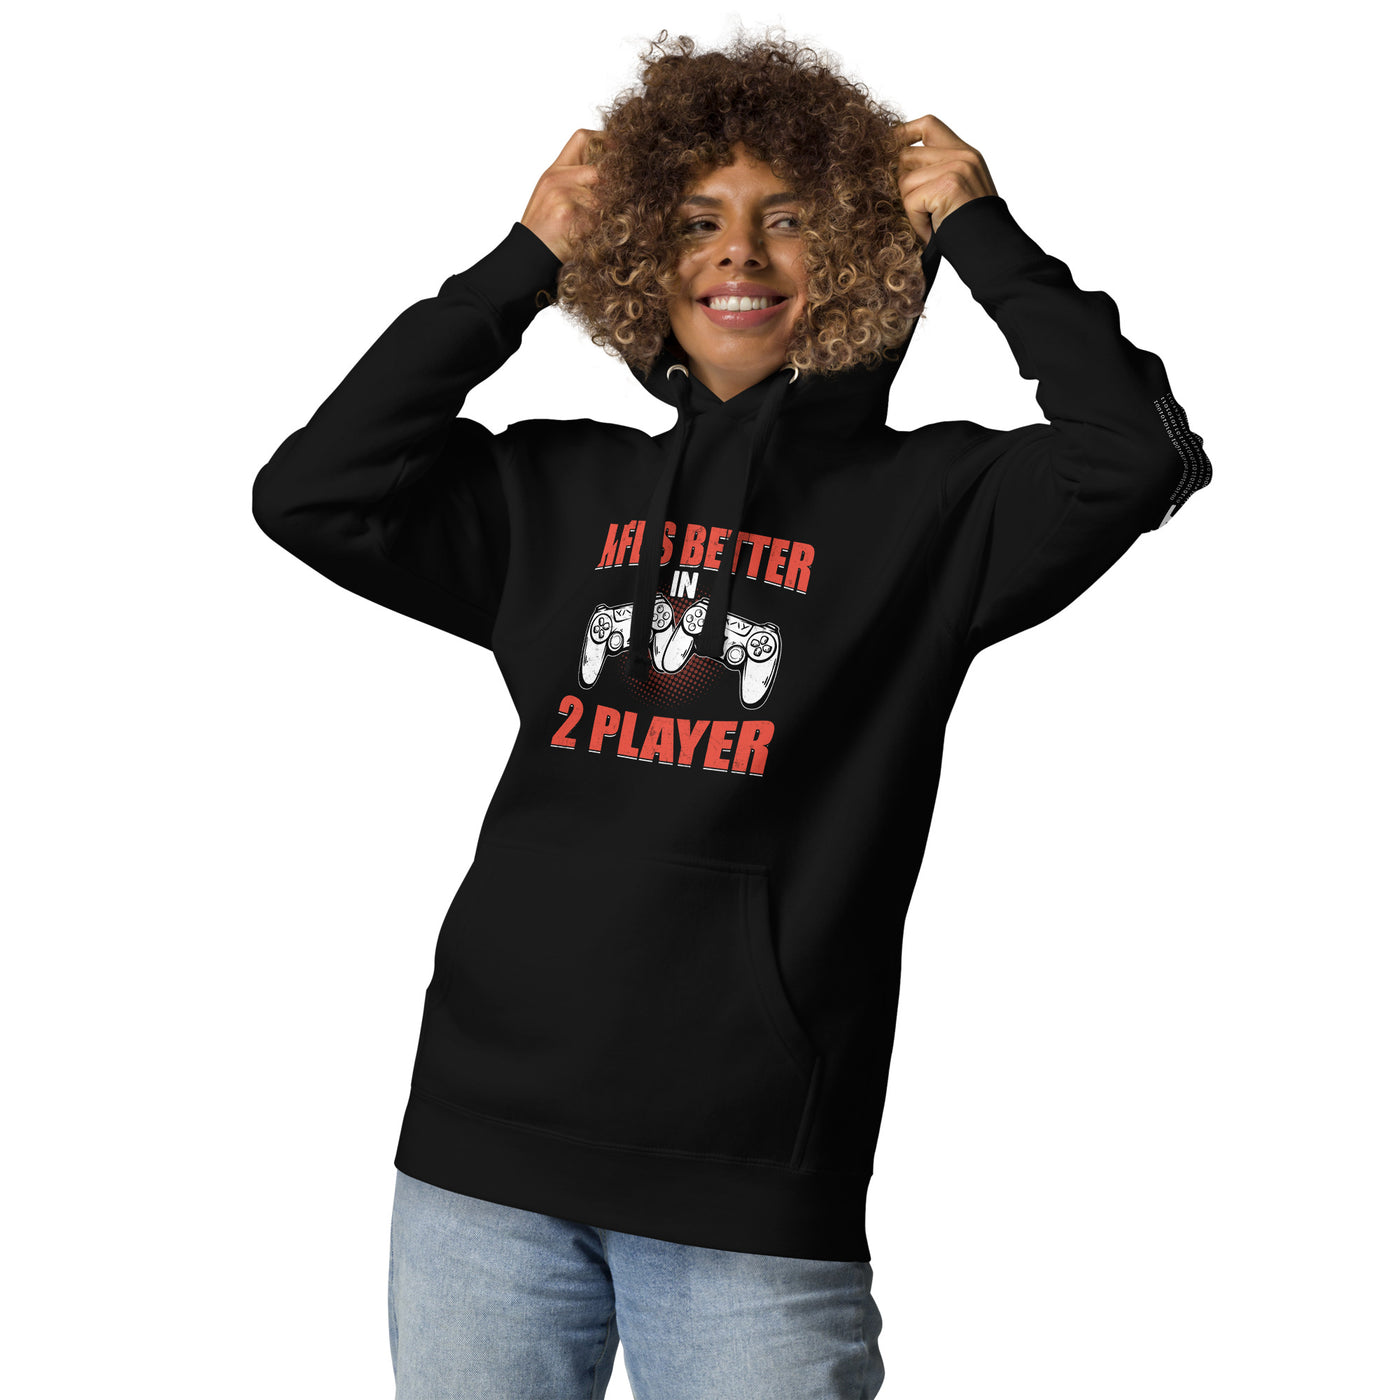 Life's Better in Two Players - Unisex Hoodie